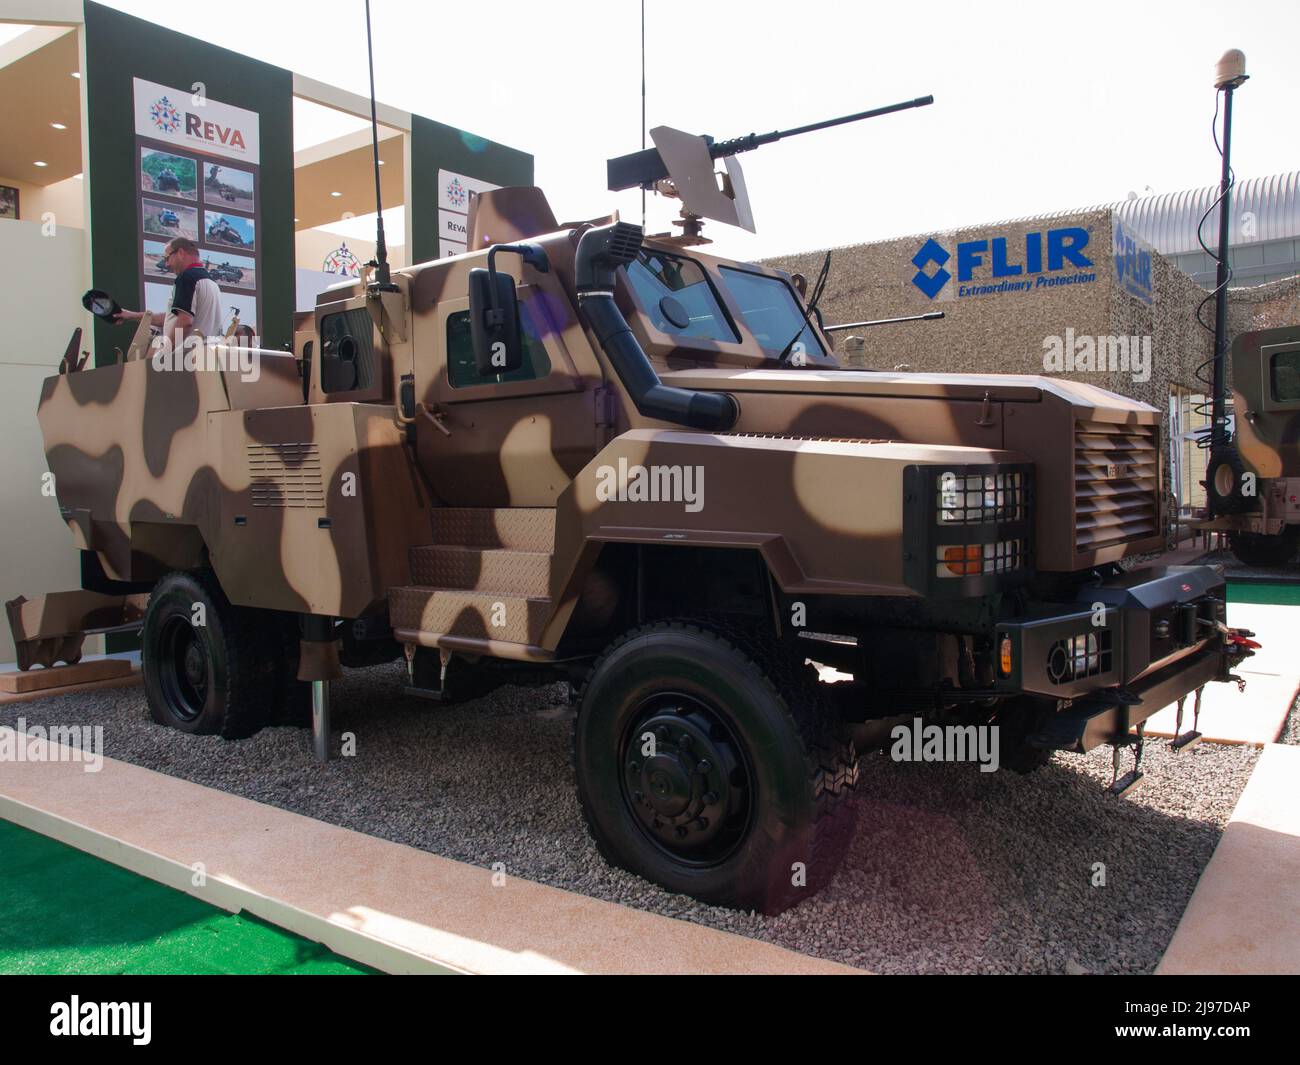 Abu Dhabi, UAE - Feb.23. 2011: IGG (International Golden Group) Agrab Mk2 MMS (Mobile Mortar Systems) on South African REVA IV armored vehicle in IDEX Stock Photo